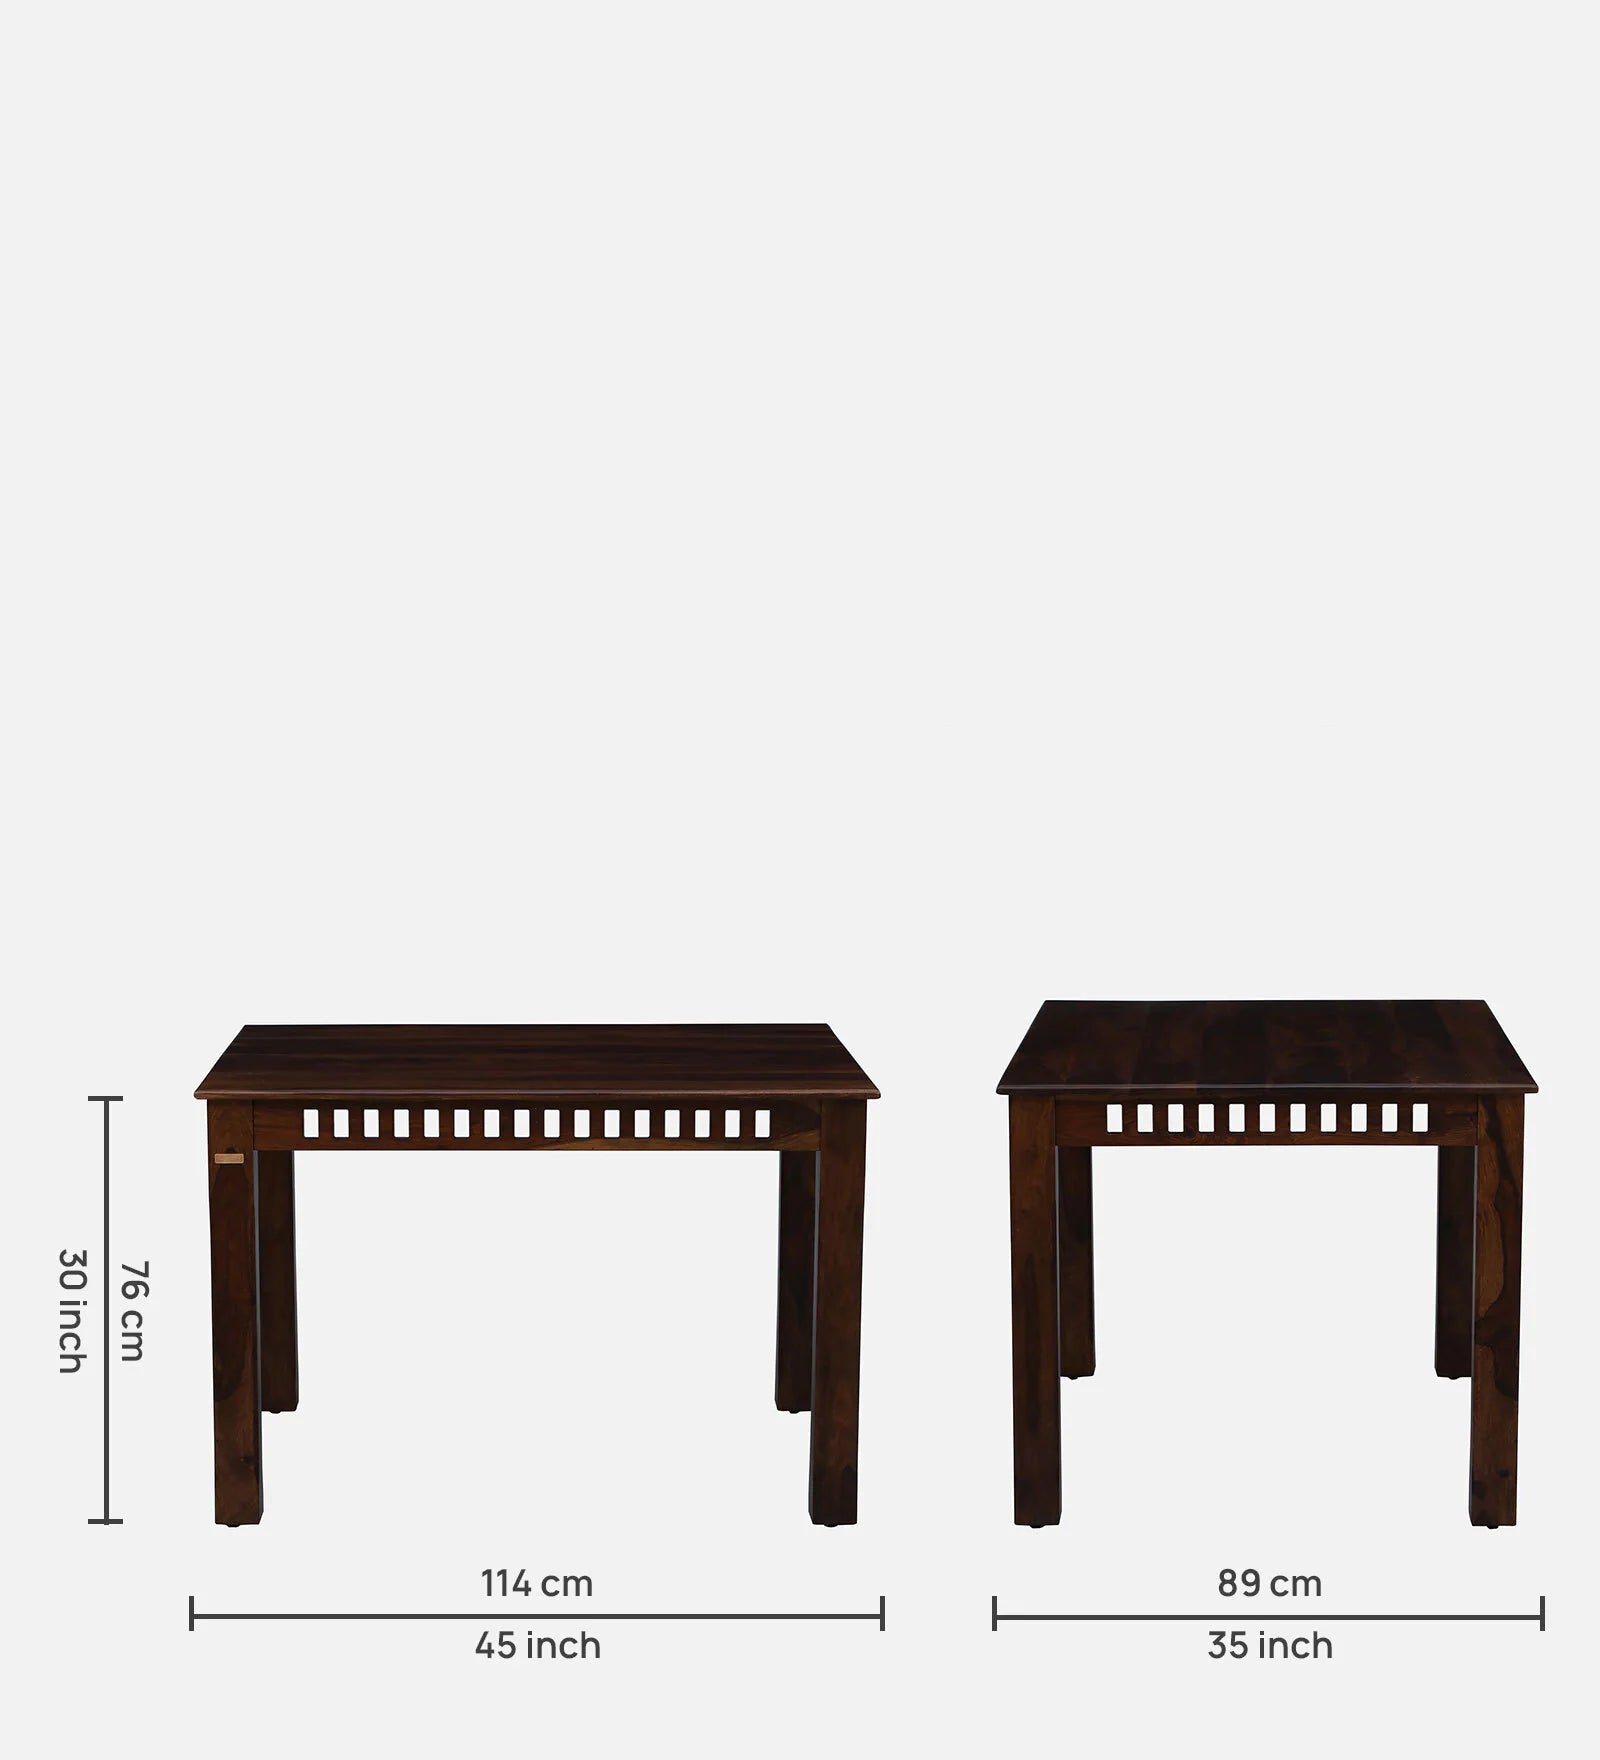 Oasis Solid Wood 4 Seater Dining Set With Chair And Bench In Provincial Teak Finish - By Rajwada - Rajwada Furnish